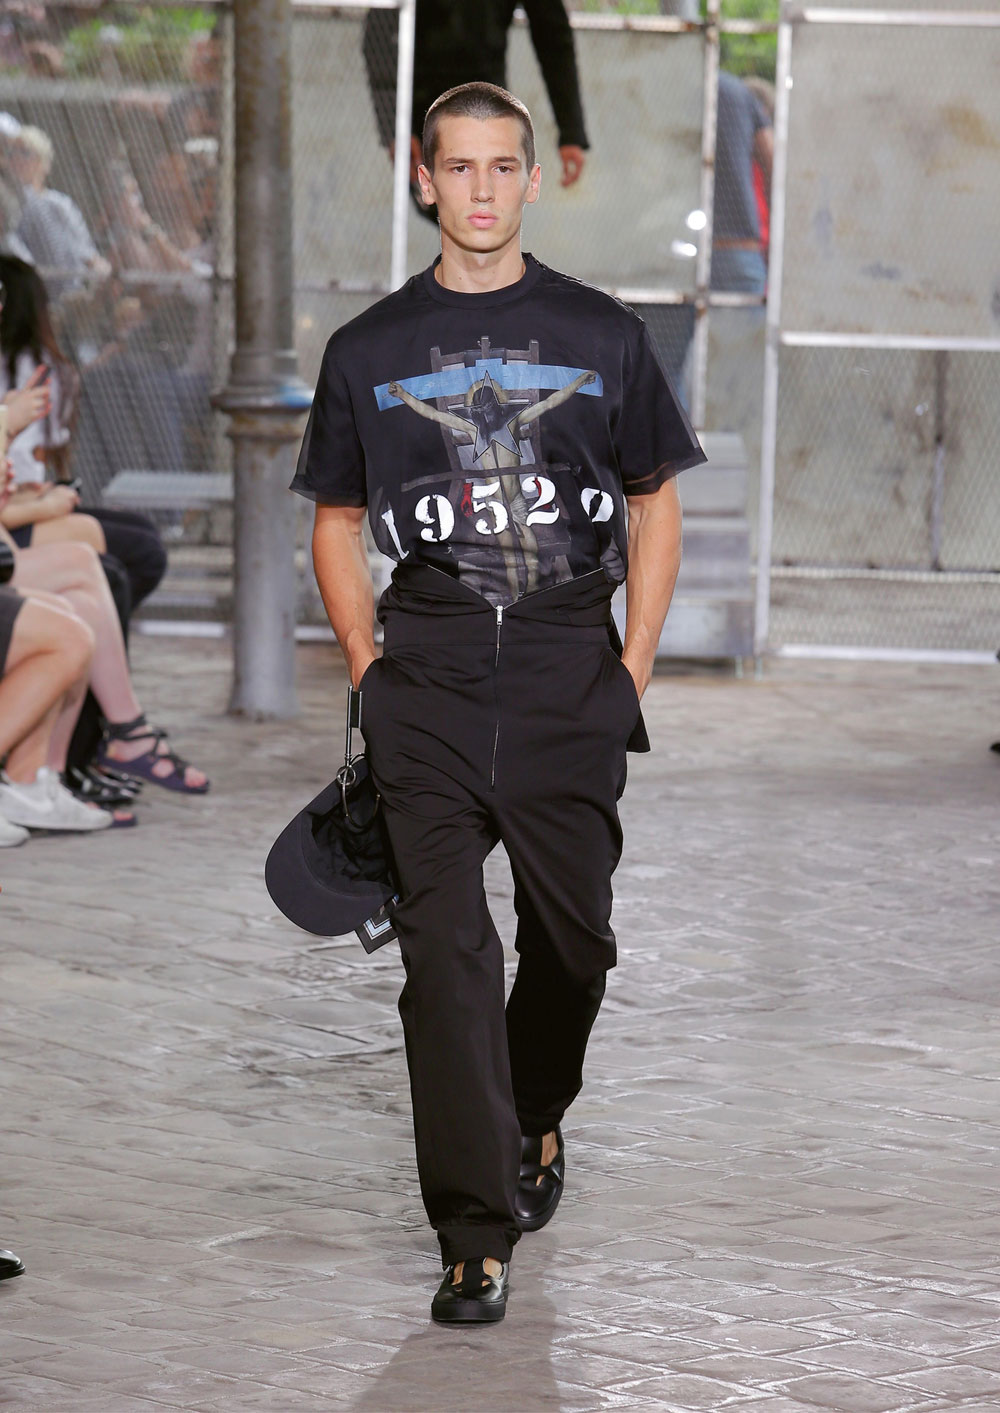 #PFW GIVENCHY SPRING SUMMER 2016 MENSWEAR COLLECTION